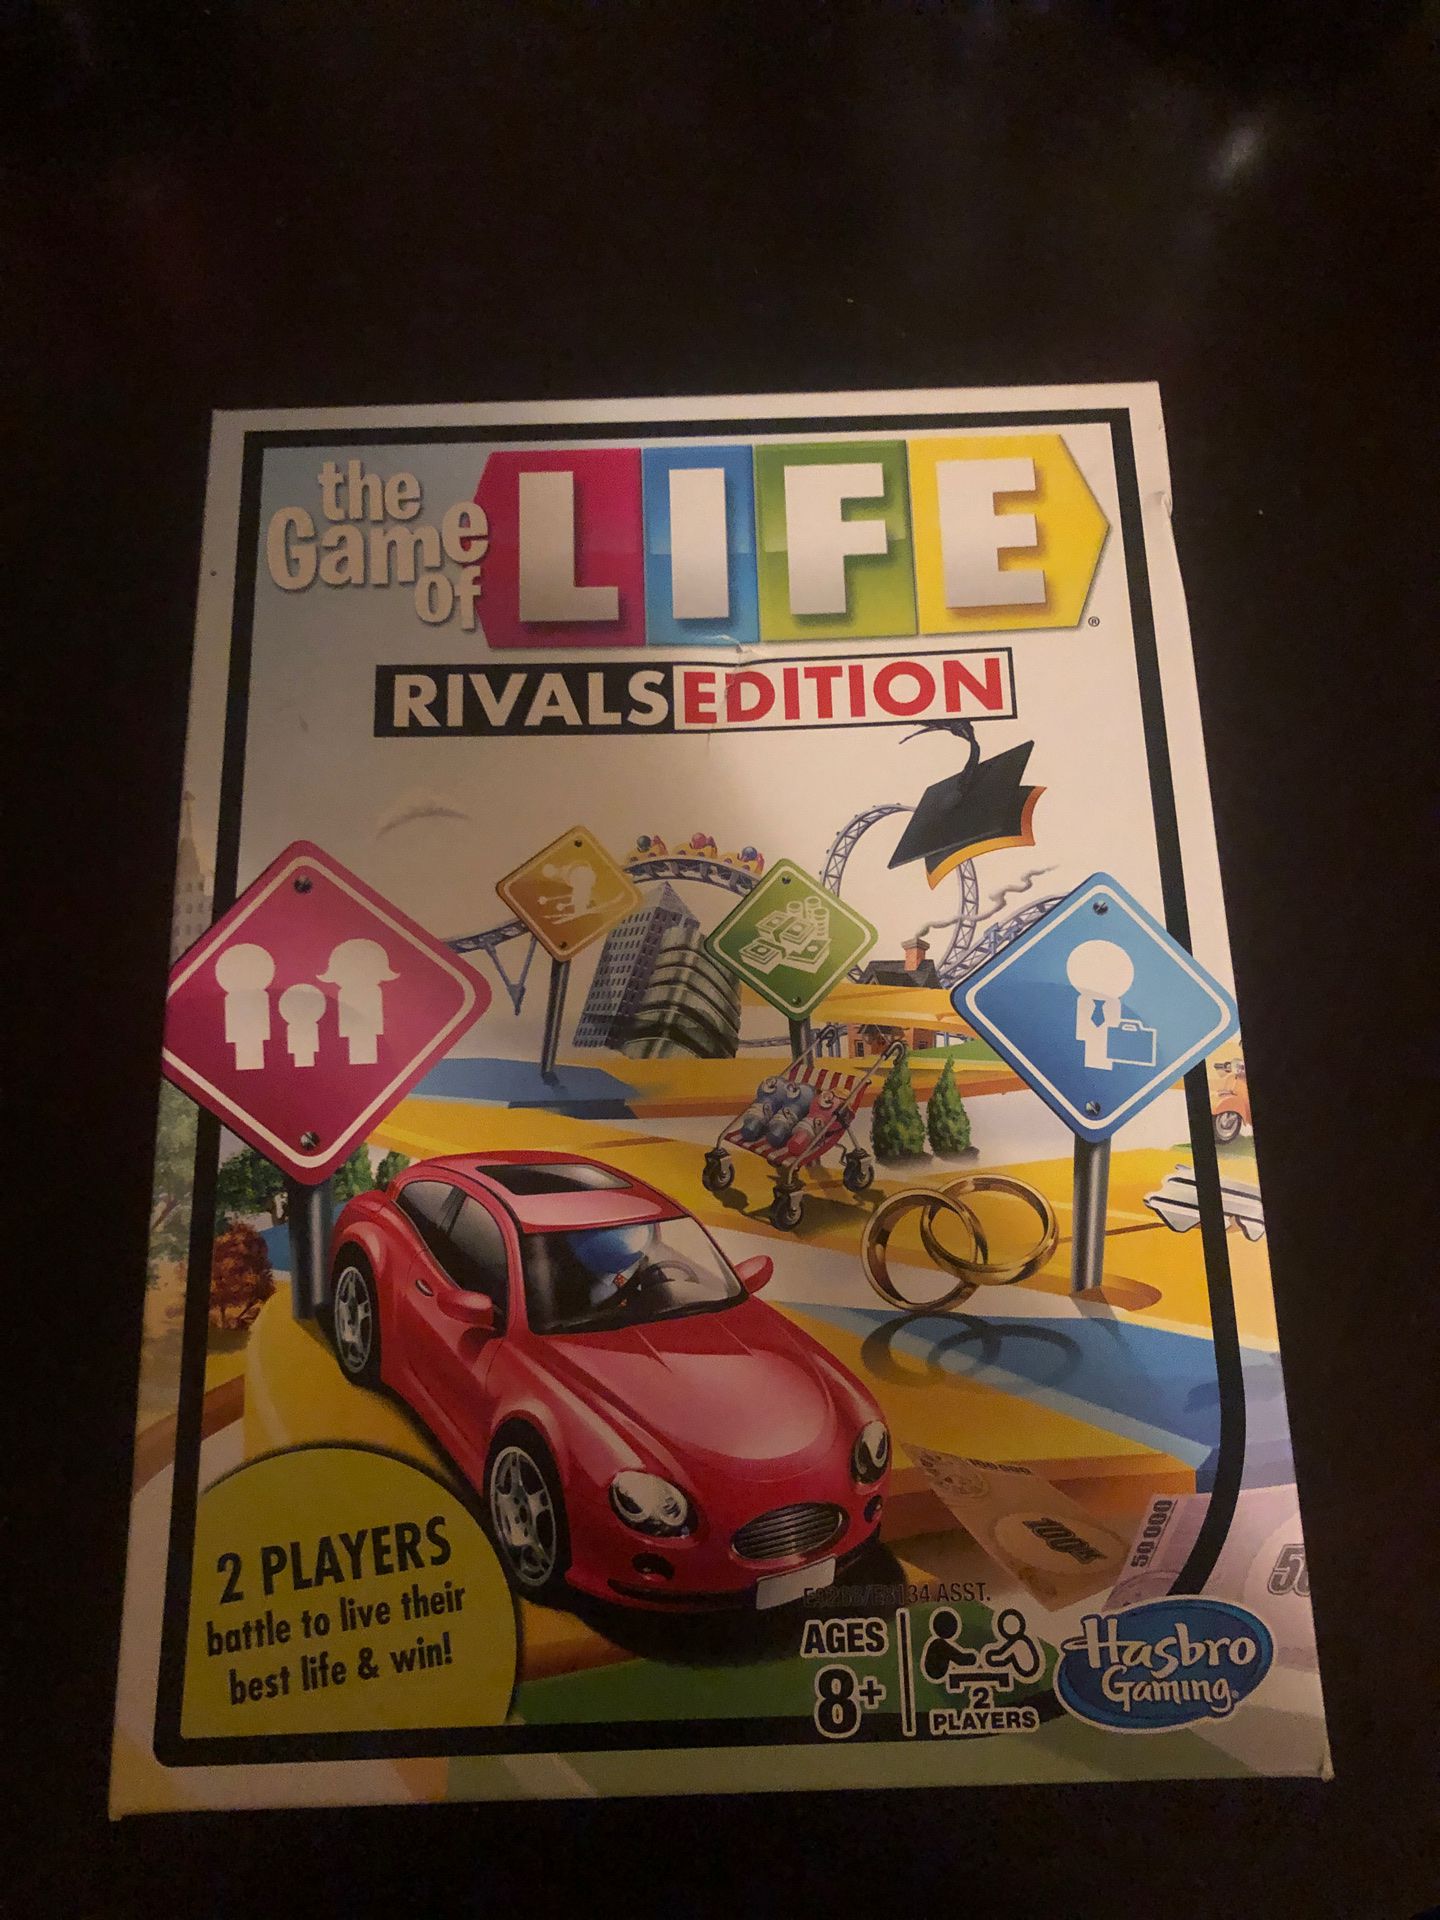 The game of life rivals edition!